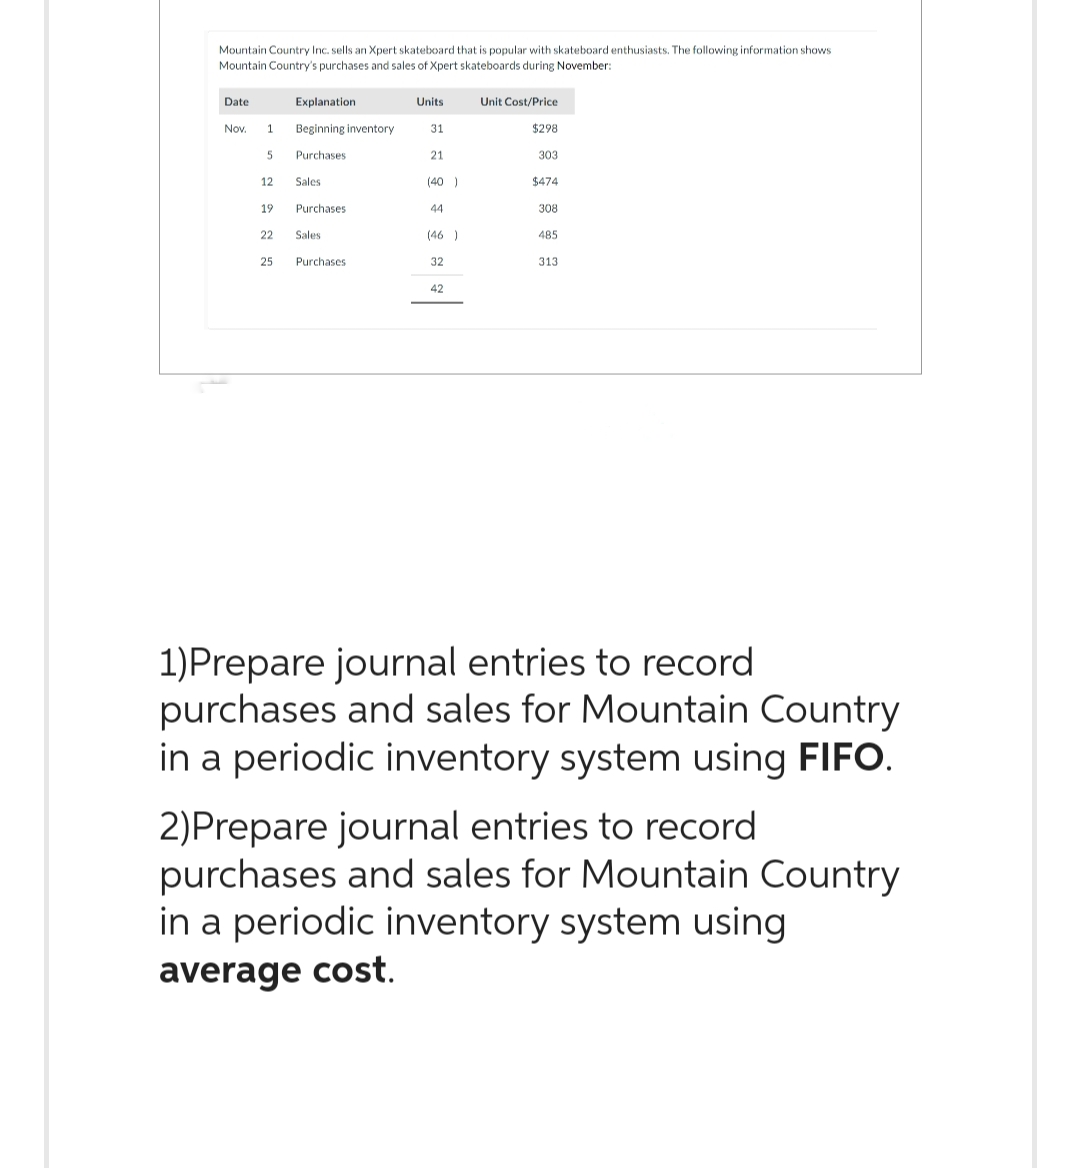 Mountain Country Inc. sells an Xpert skateboard that is popular with skateboard enthusiasts. The following information shows
Mountain Country's purchases and sales of Xpert skateboards during November:
Date
Nov.
1
5
12
19
22
25
Explanation
Beginning inventory
Purchases
Sales
Purchases
Sales
Purchases
Units
31
21
(40)
44
(46)
32
42
Unit Cost/Price
$298
303
$474
308
485
313
1) Prepare journal entries to record
purchases and sales for Mountain Country
in a periodic inventory system using FIFO.
2)Prepare journal entries to record
purchases and sales for Mountain Country
in a periodic inventory system using
average cost.